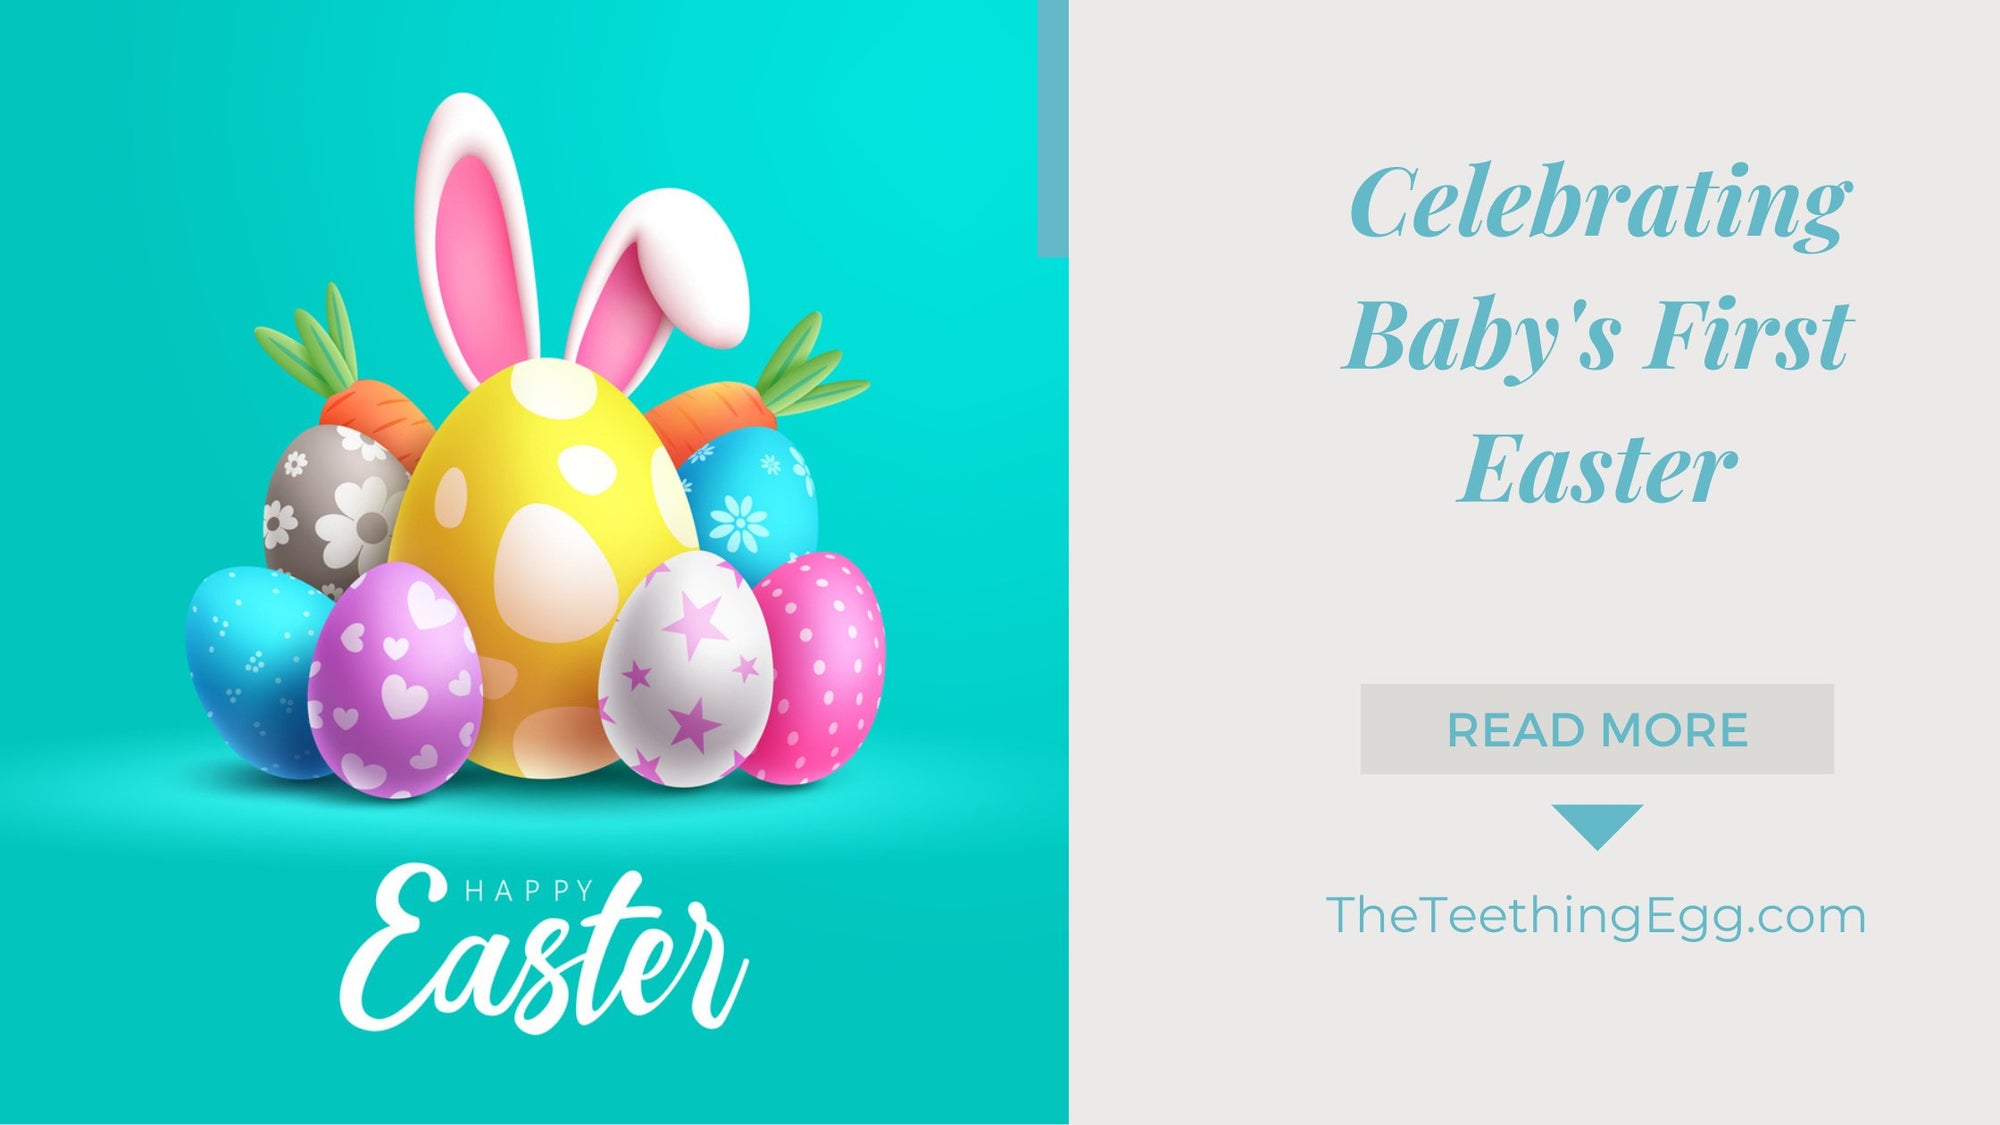 Celebrating Baby's First Easter: Creating Cherished Memories